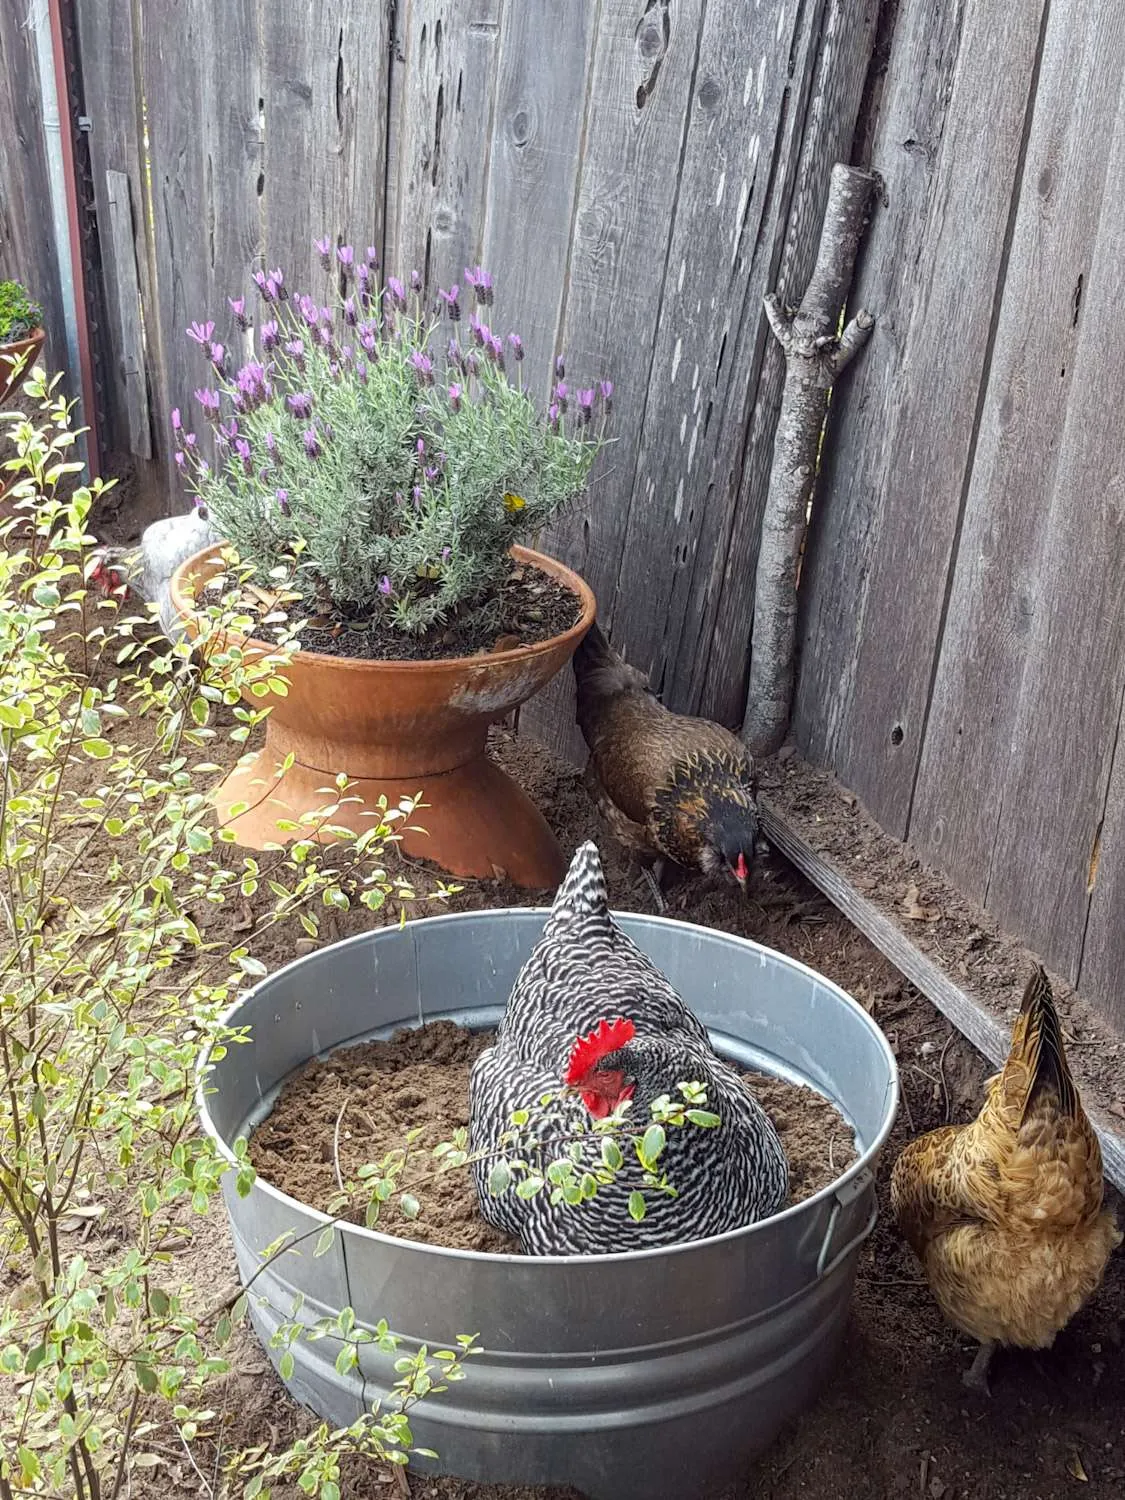 A Barred rock chicken which is black and white in color with a large red comb is sitting inside a metal tub full of dirt which is acting as a chicken dust bath. Two other chickens pick around the outside area along an old fence. 